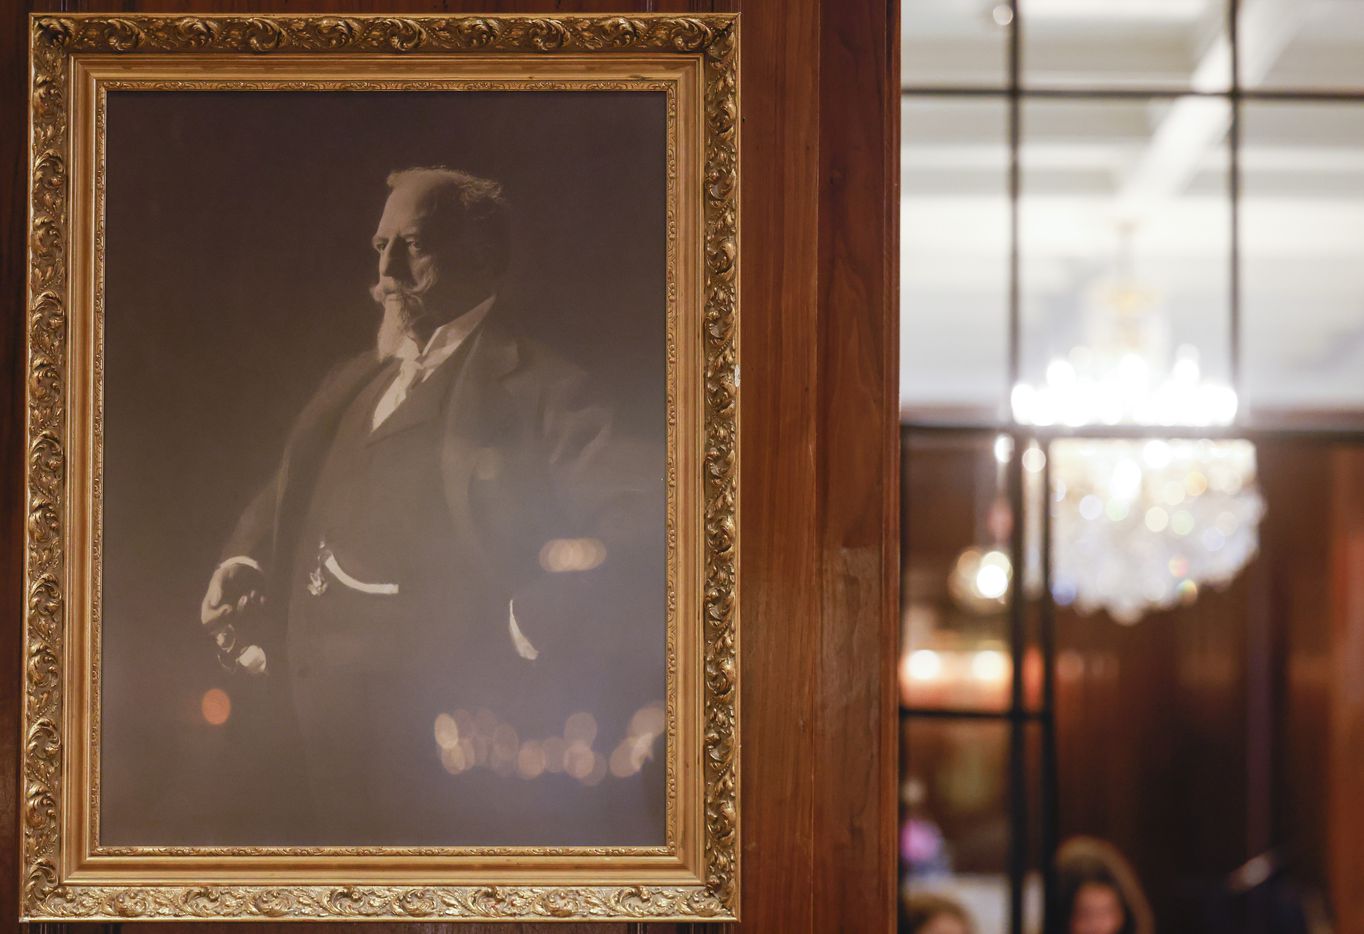 A portrait of co-founder Adolphus Busch hangs in the City Hall Bar room of Adolphus Hotel in...